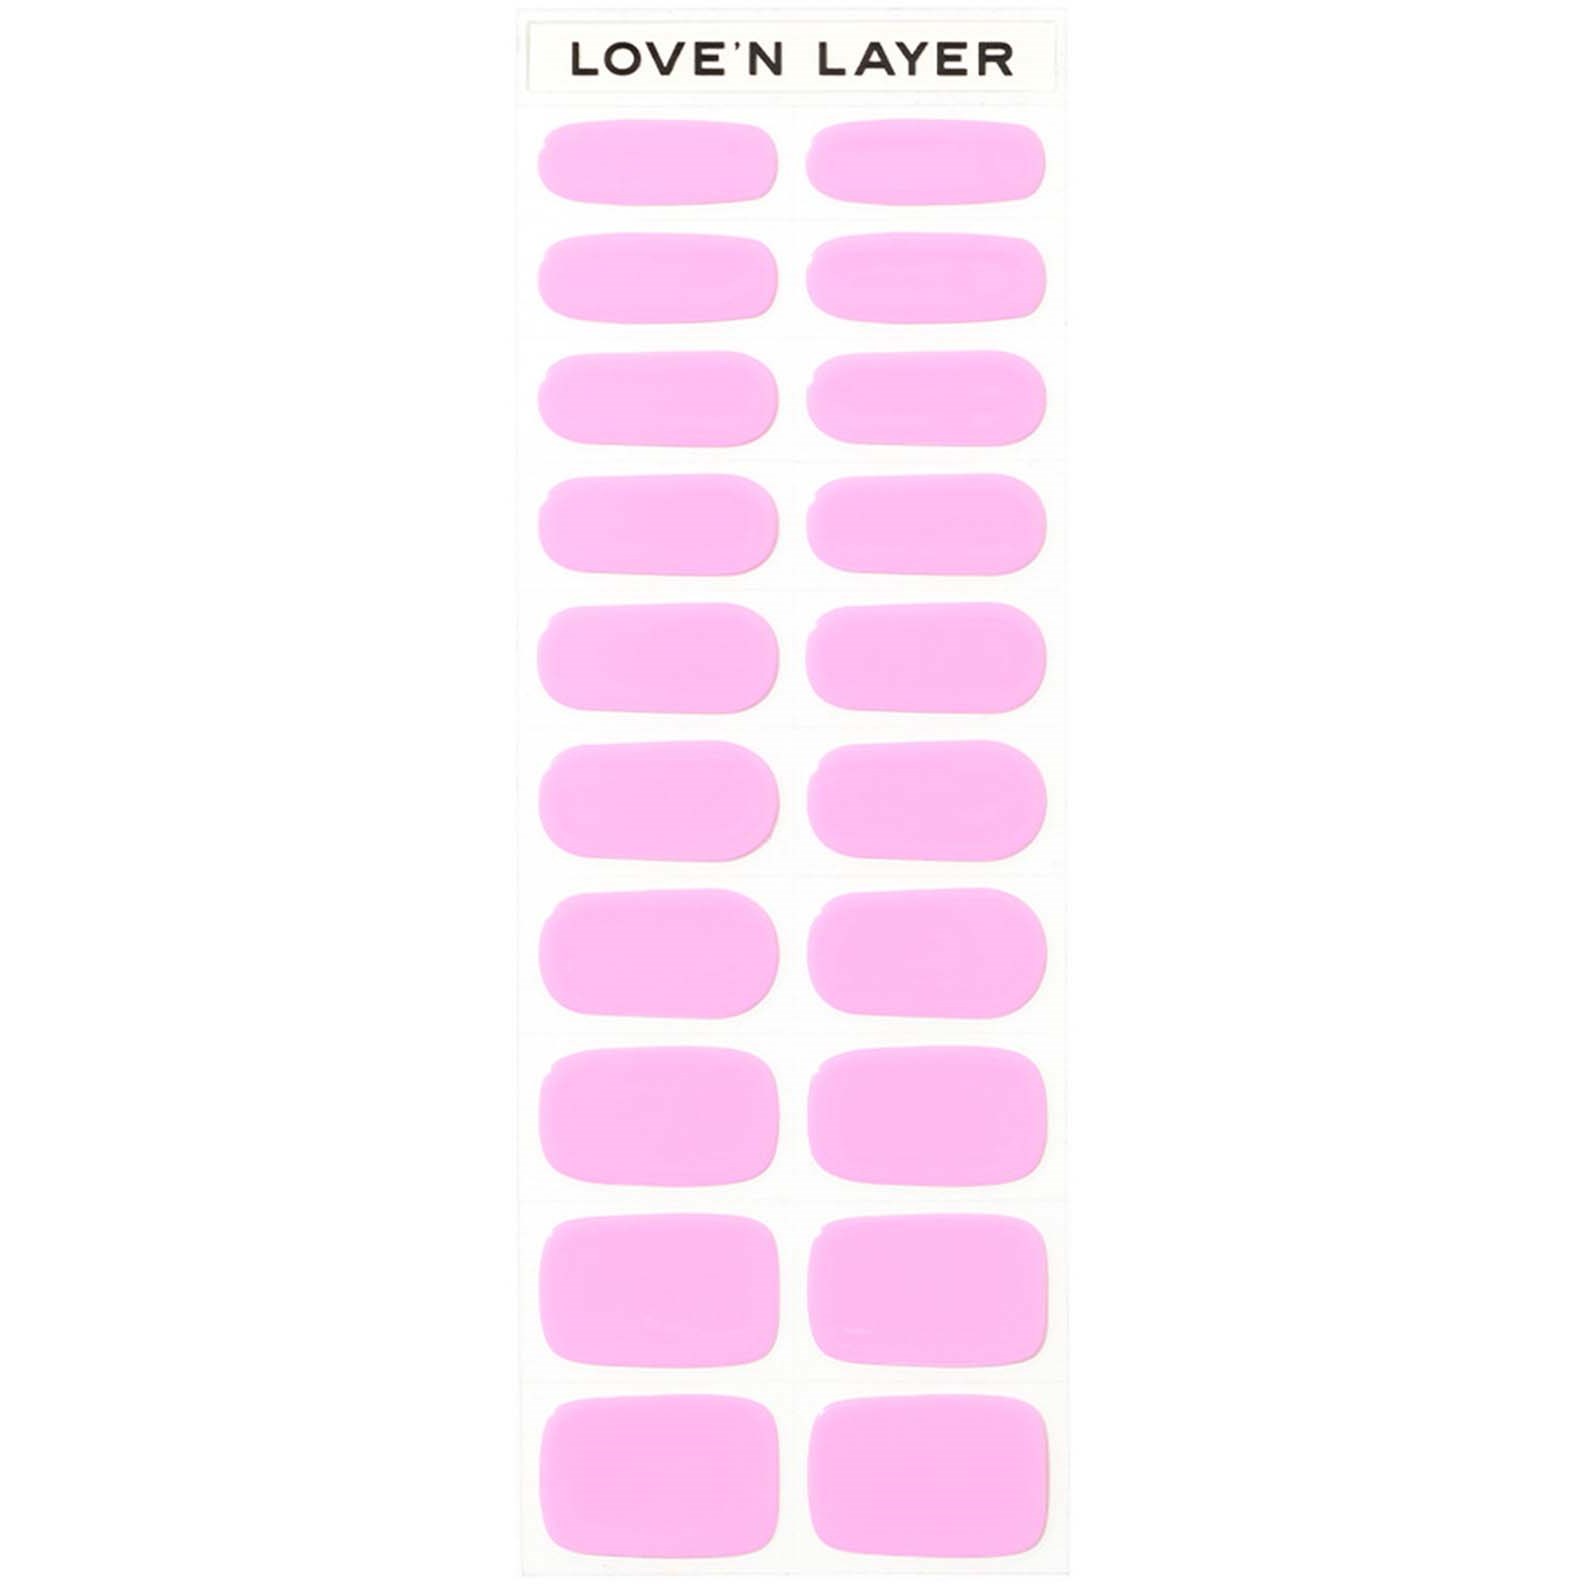 Loven Layer Solid Light Purple